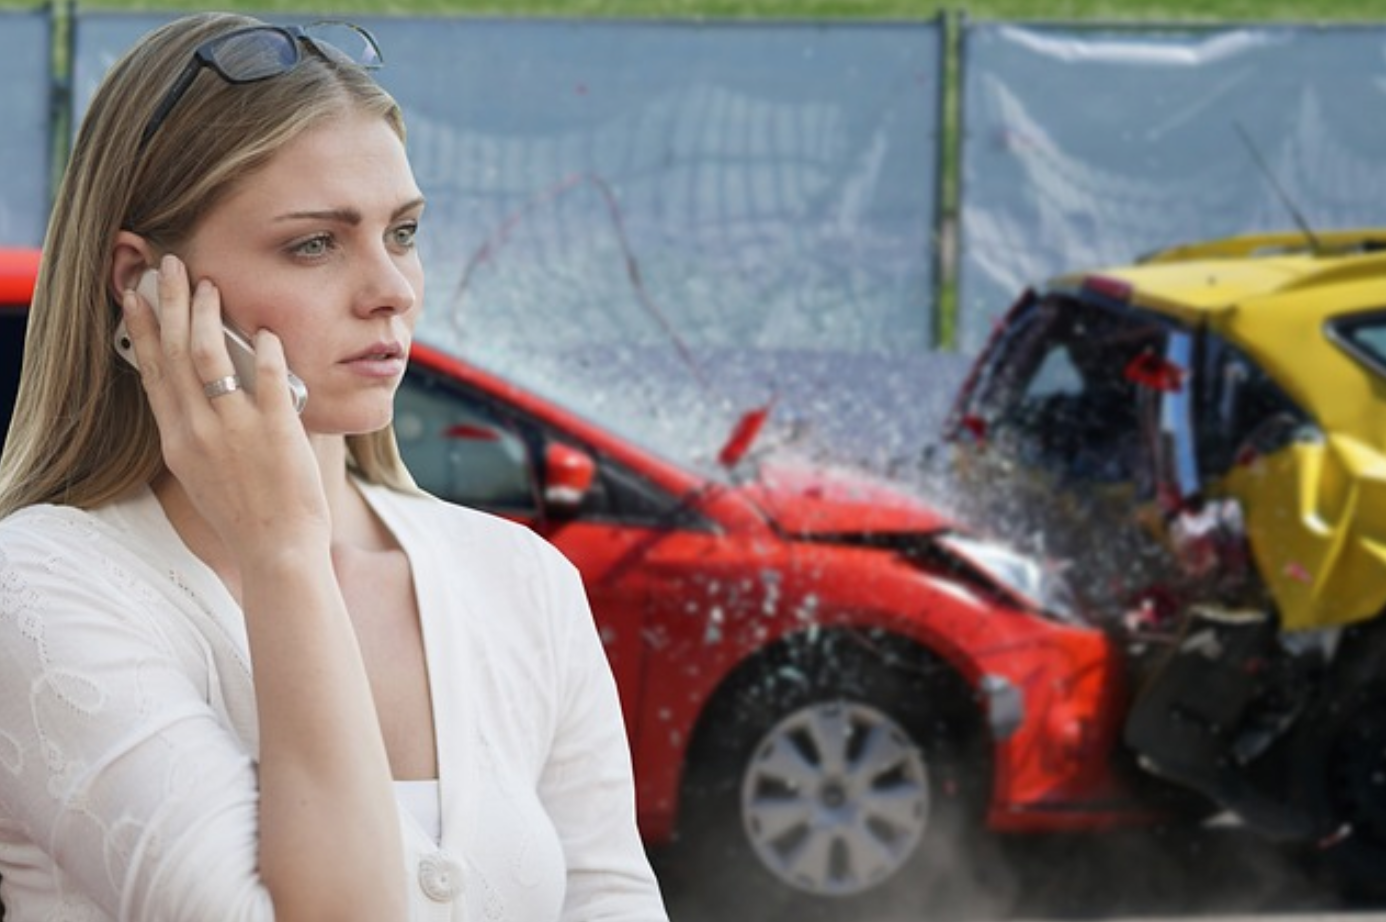 Woman on cellphone after witnessing car accident; image by Tumisu, via Pixabay.com.